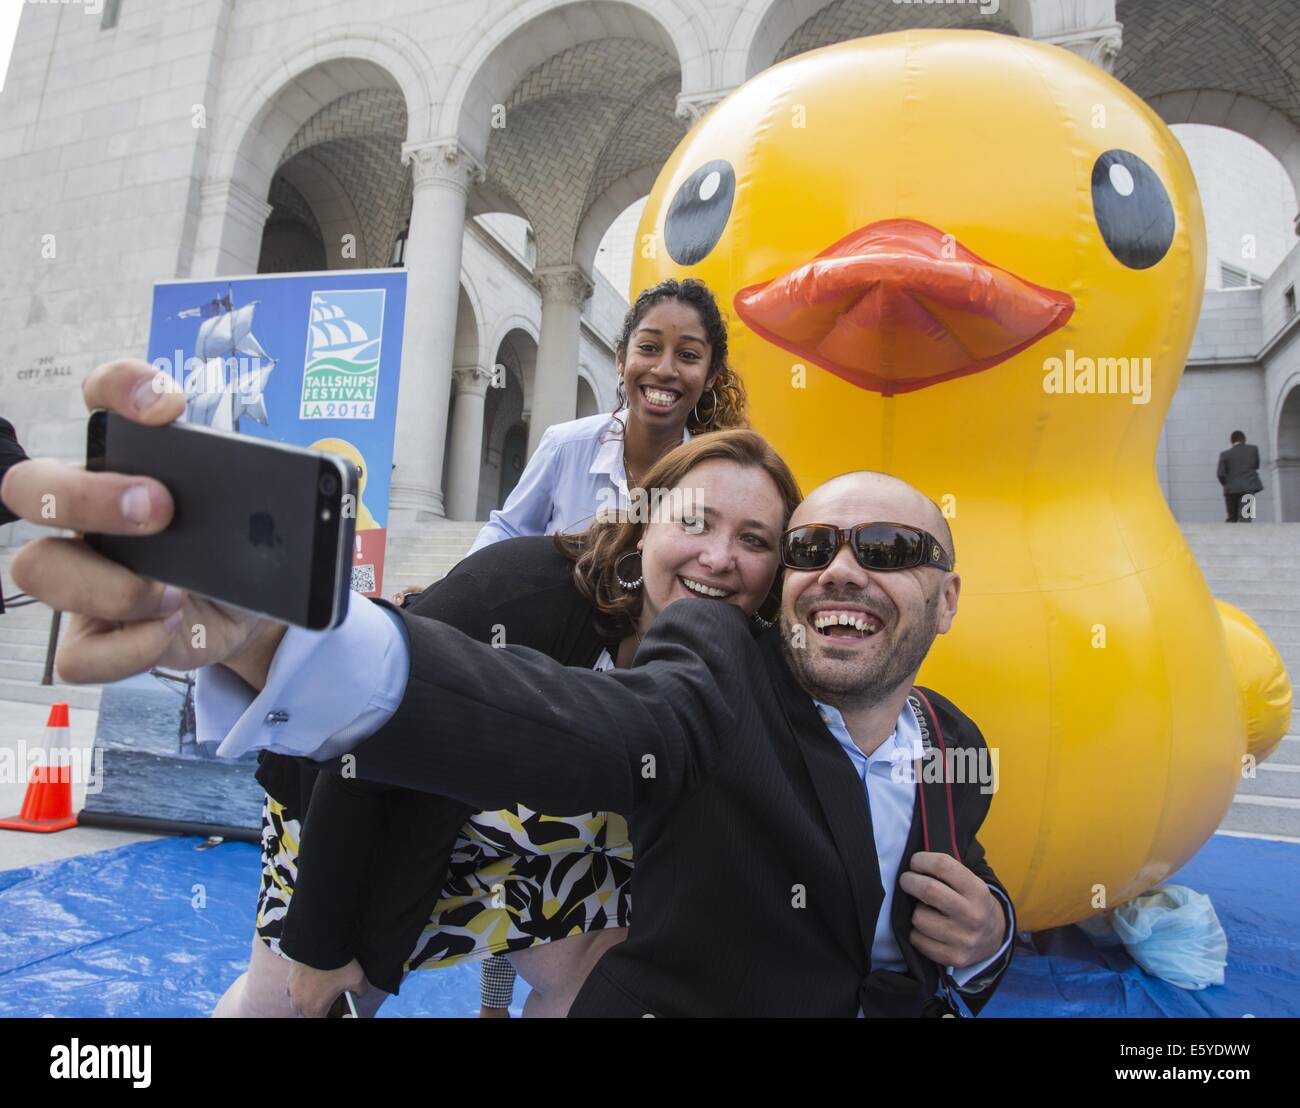 Los Angeles, California, USA. 8th Aug, 2014. Branimir Kvartuc poses with his friends for a selfie with a 10-foot-tall rubber ducky ''baby duck'' squatting on the Spring Street steps of Los Angeles City Hall on Friday, Aug. 8, 2014, in Los Angeles. The bright yellow, inflatable ducky is wandering the city in search of its mother, a 60 feet high and dubbed by event organizers as the world's largest rubber ducky as part of a promotional stunt for the Tall Ships Festival taking place Aug. 20-24 at the Port of Los Angeles. Credit:  Ringo Chiu/ZUMA Wire/Alamy Live News Stock Photo